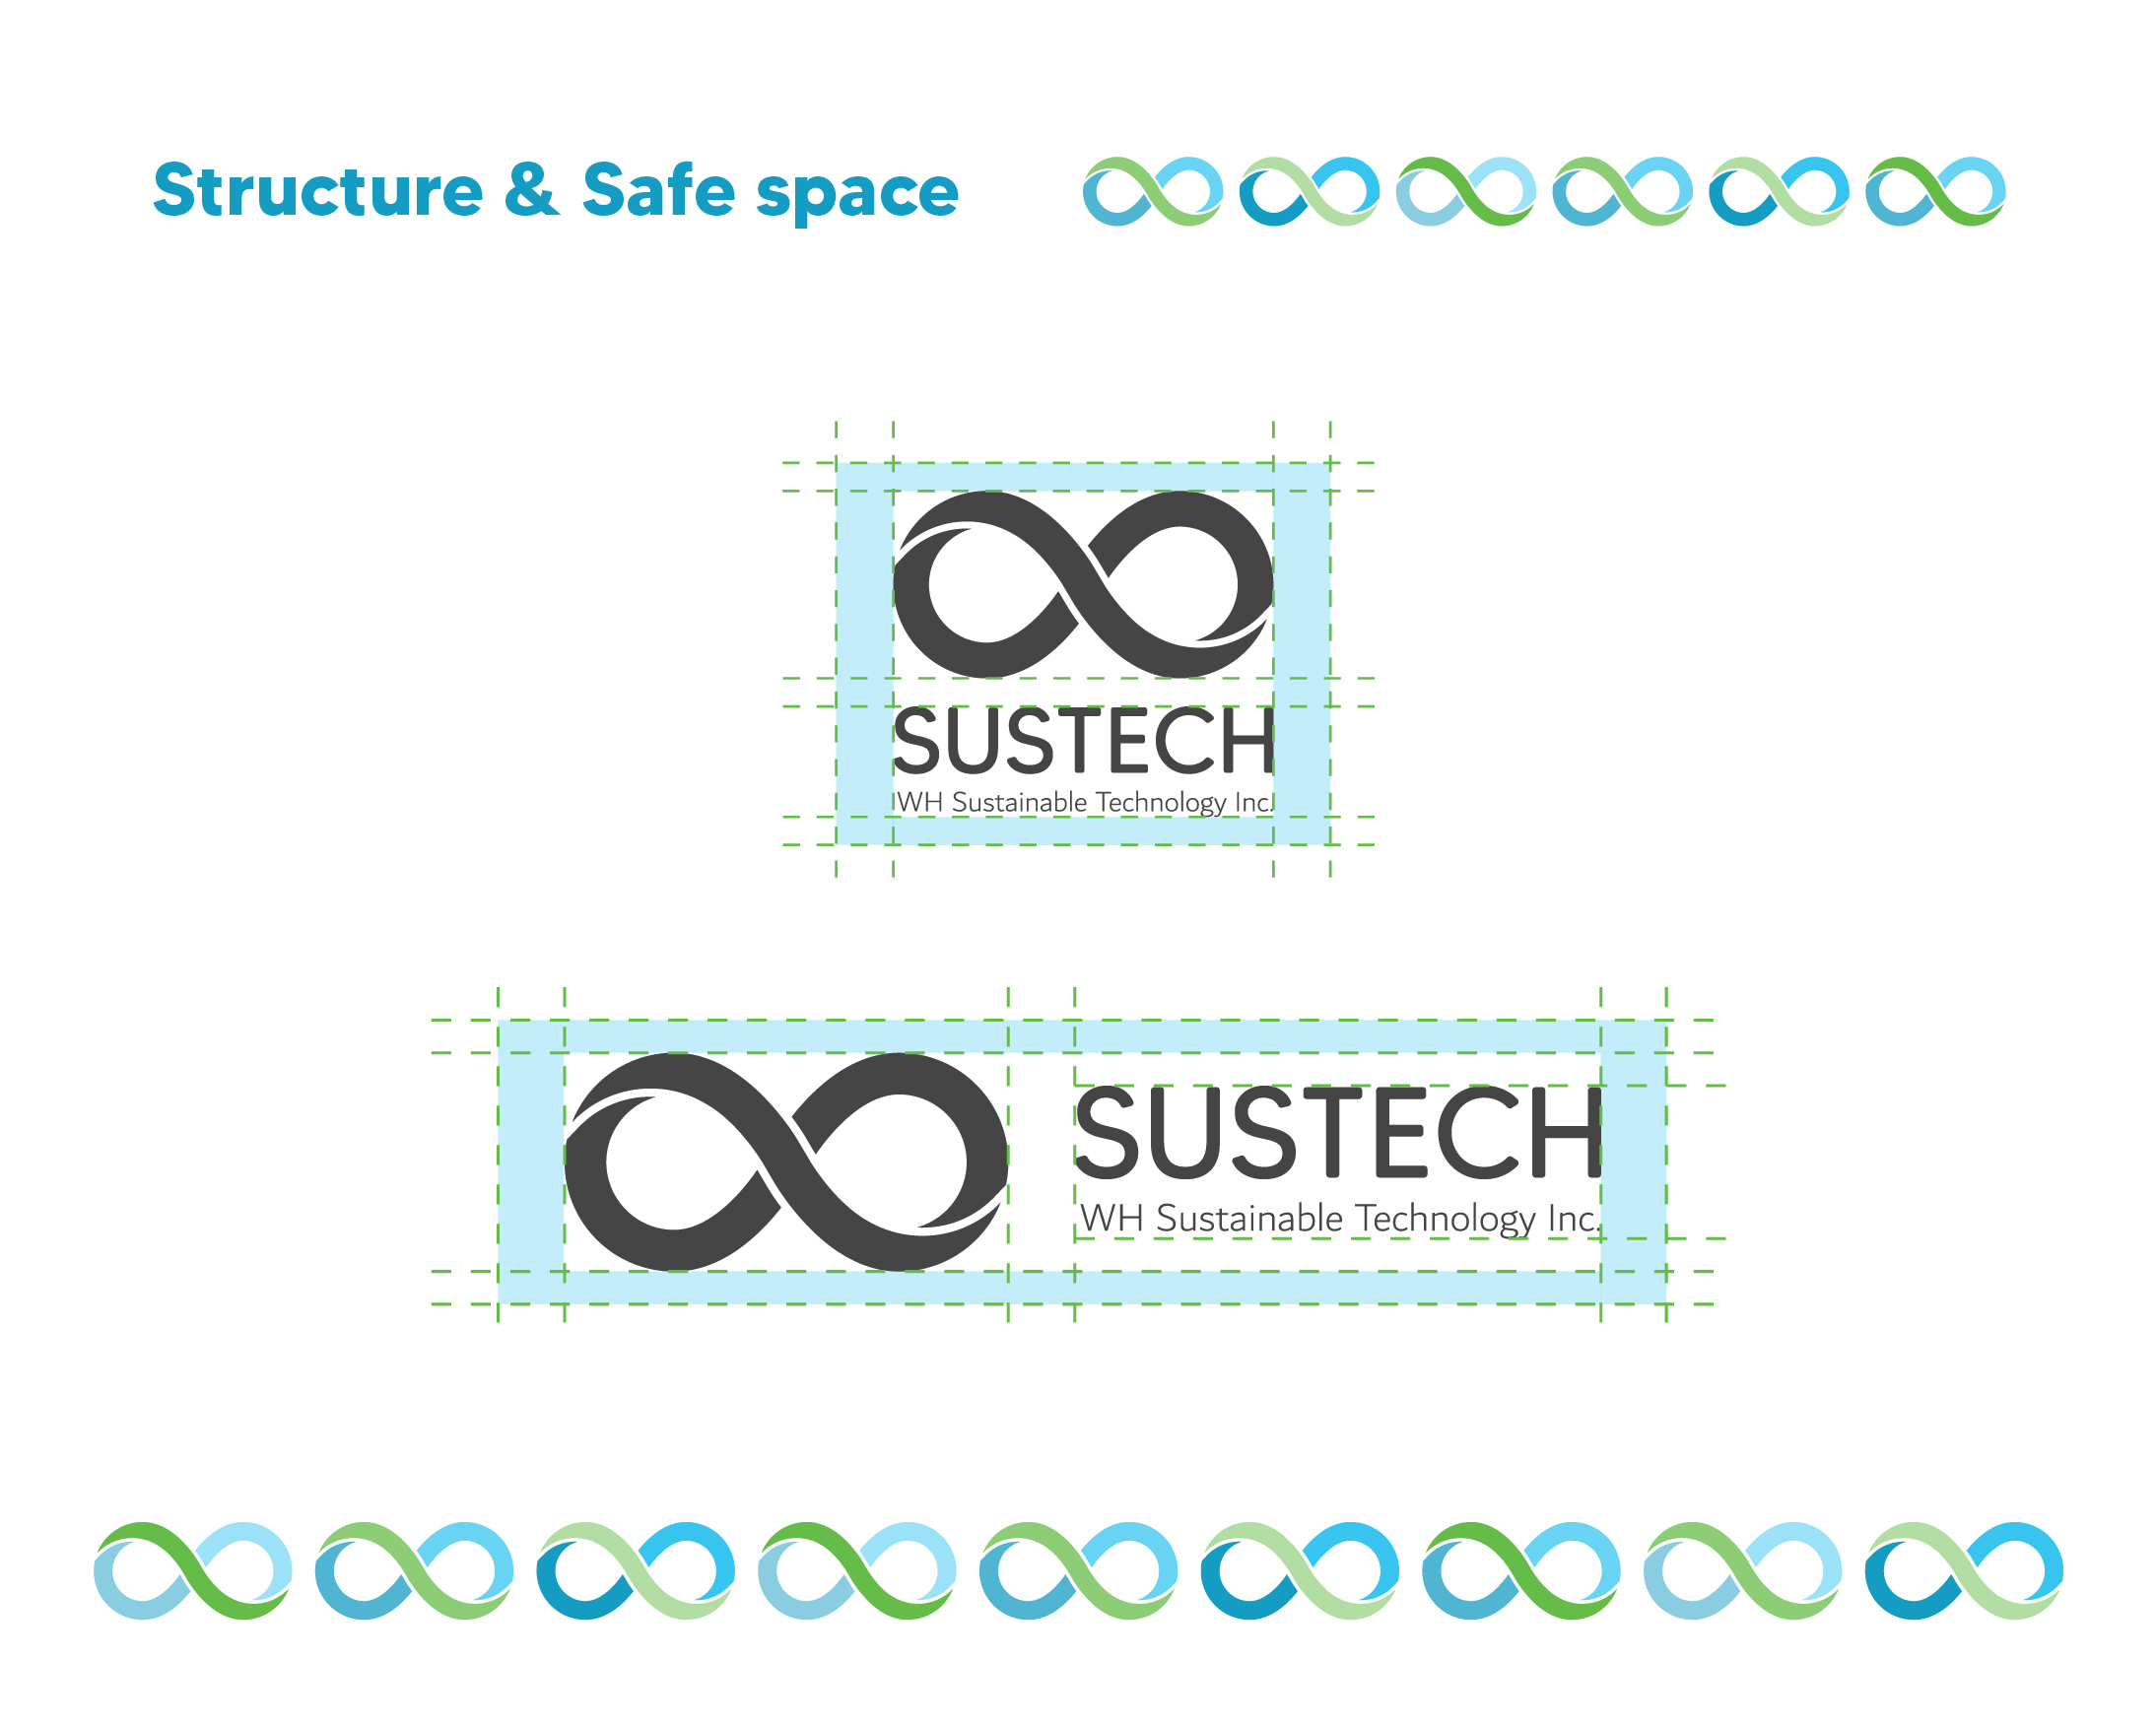 SUSTECH WH Sustainable Technologies Inc.